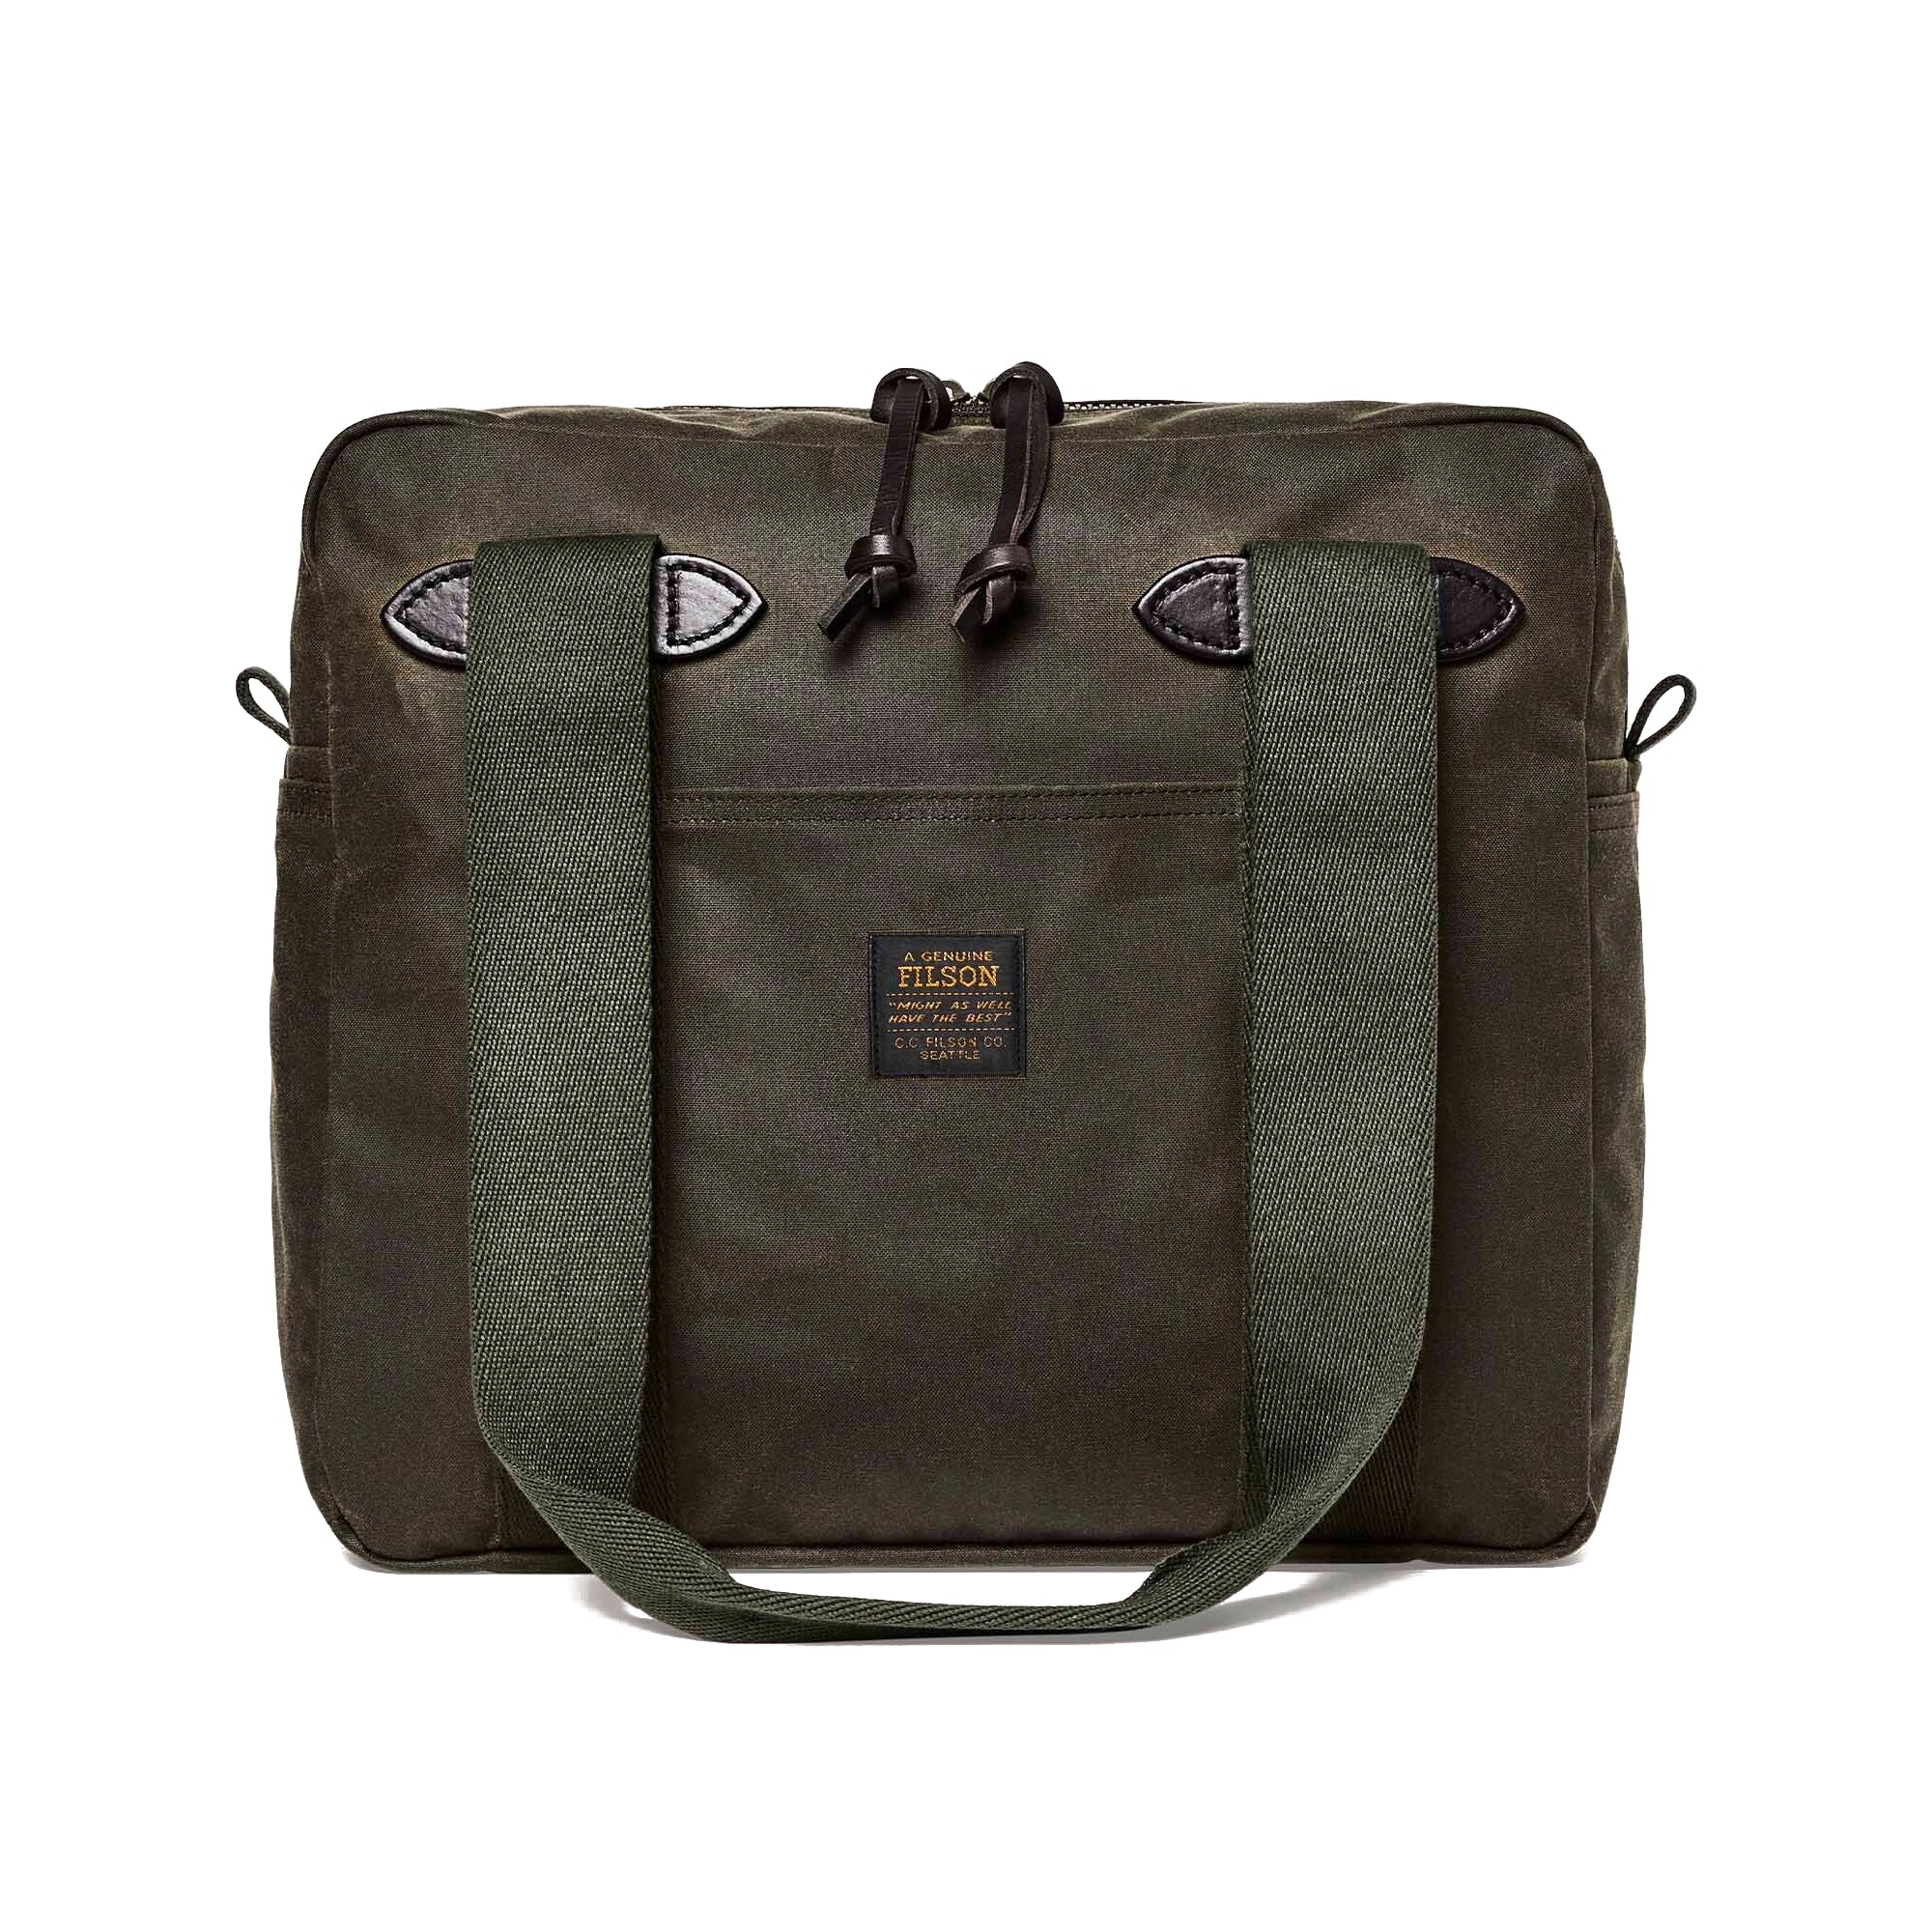 Filson Tin Cloth Tote Bag with Zipper - Otter Green